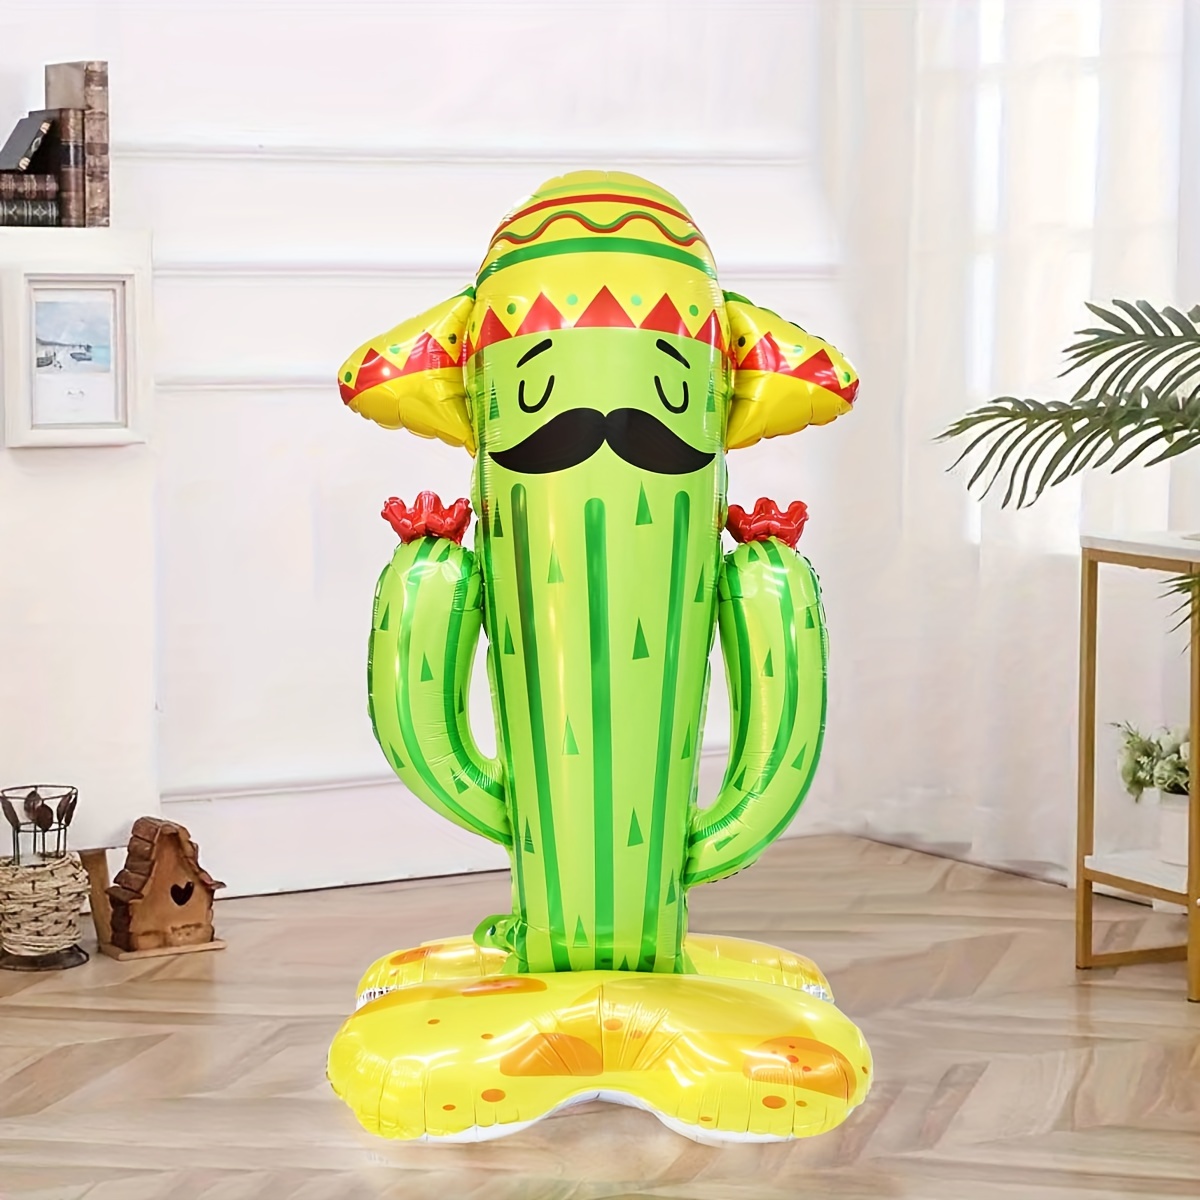 

1pc, 61-inch Extra Large Cactus Shaped Base Aluminum Film Balloon - Perfect For Hawaiian Weddings, Summer Beach Birthday Party Decorations And Hawaiian Theme Party Supplies